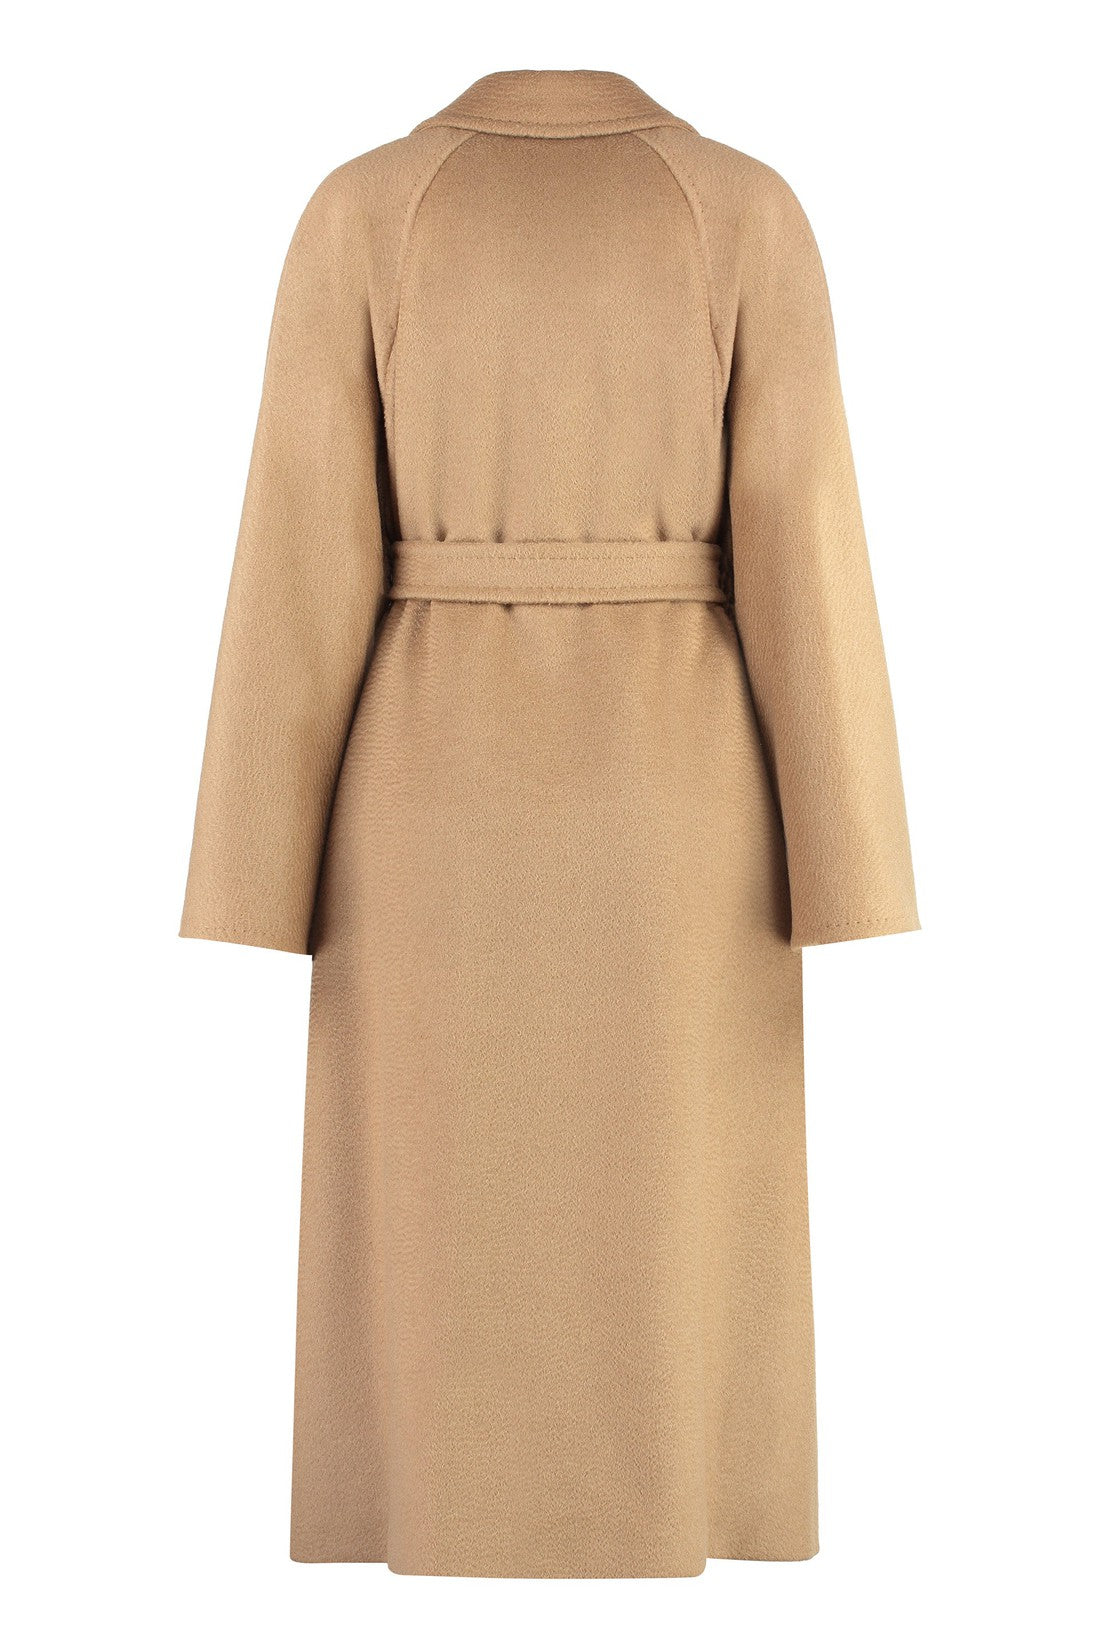 Max Mara-OUTLET-SALE-Camelwool coat-ARCHIVIST